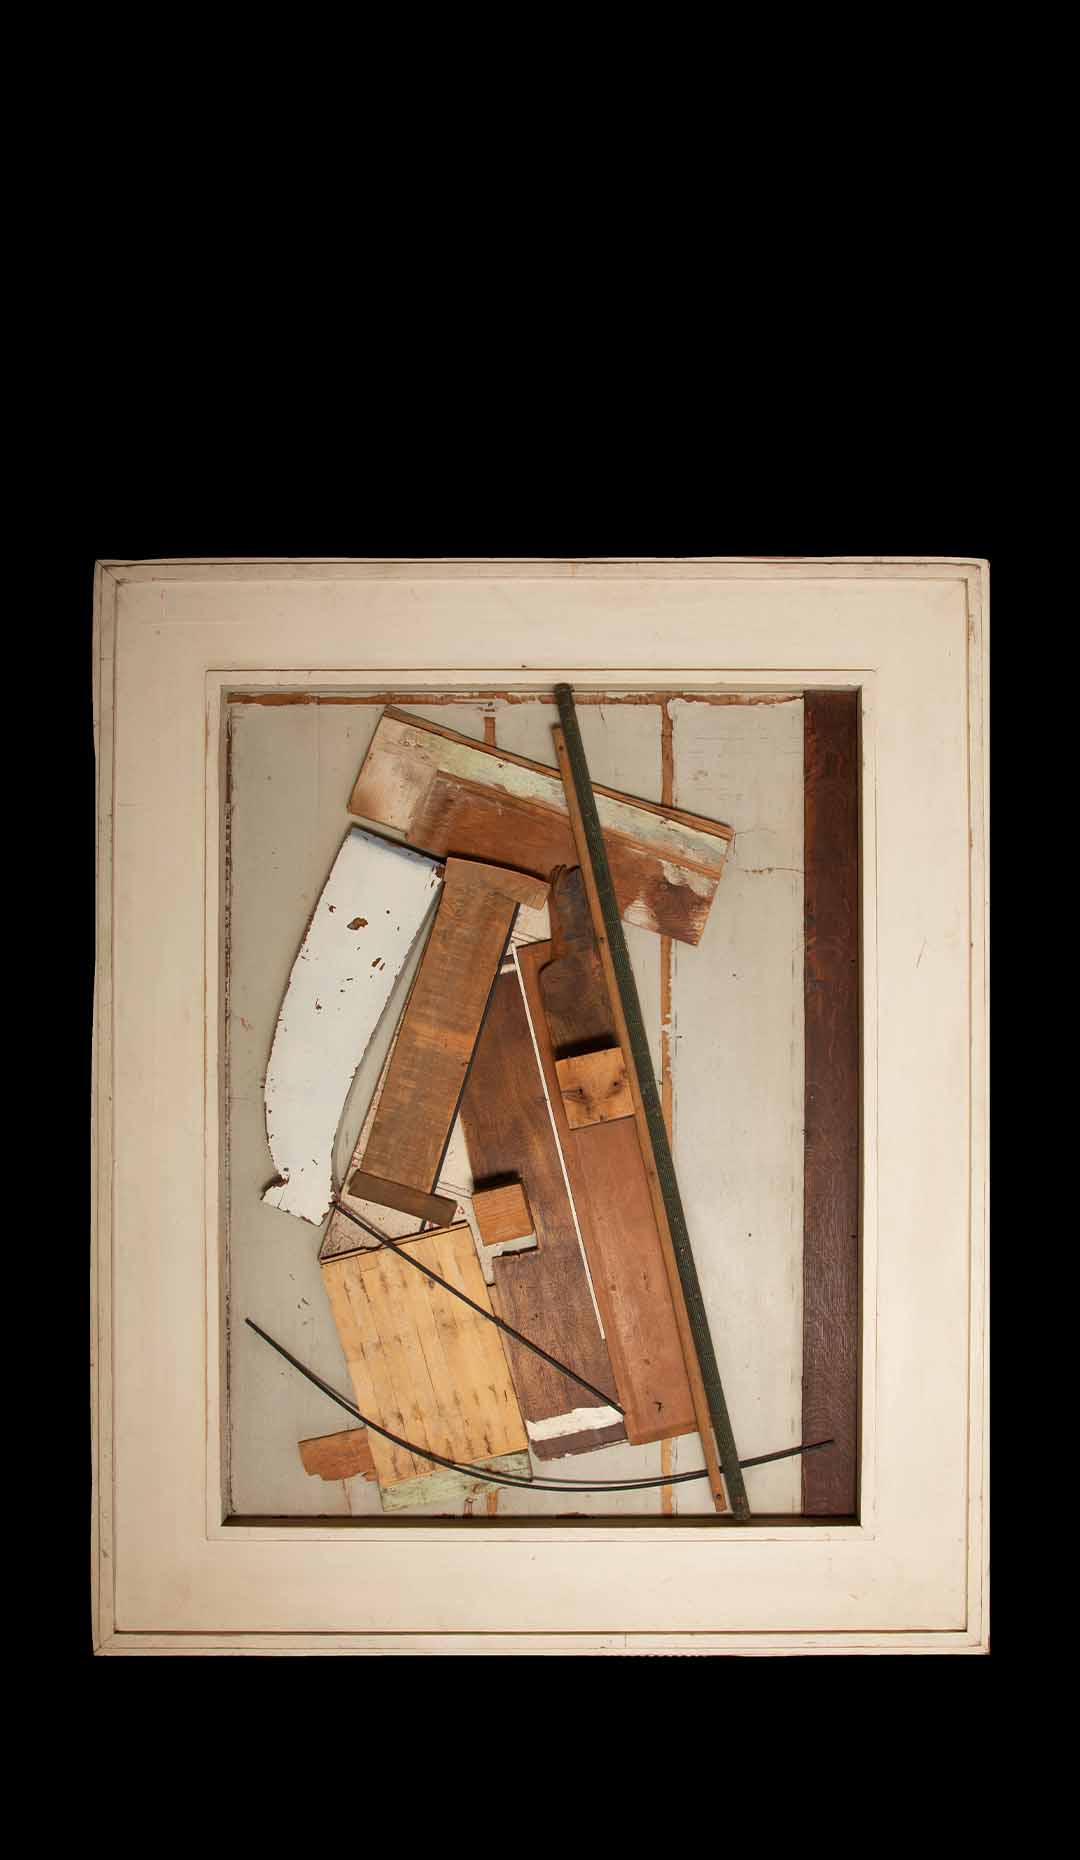 Artistic Fusion: Parquet Panels & Found Objects by Alain Le Yaouanc 66